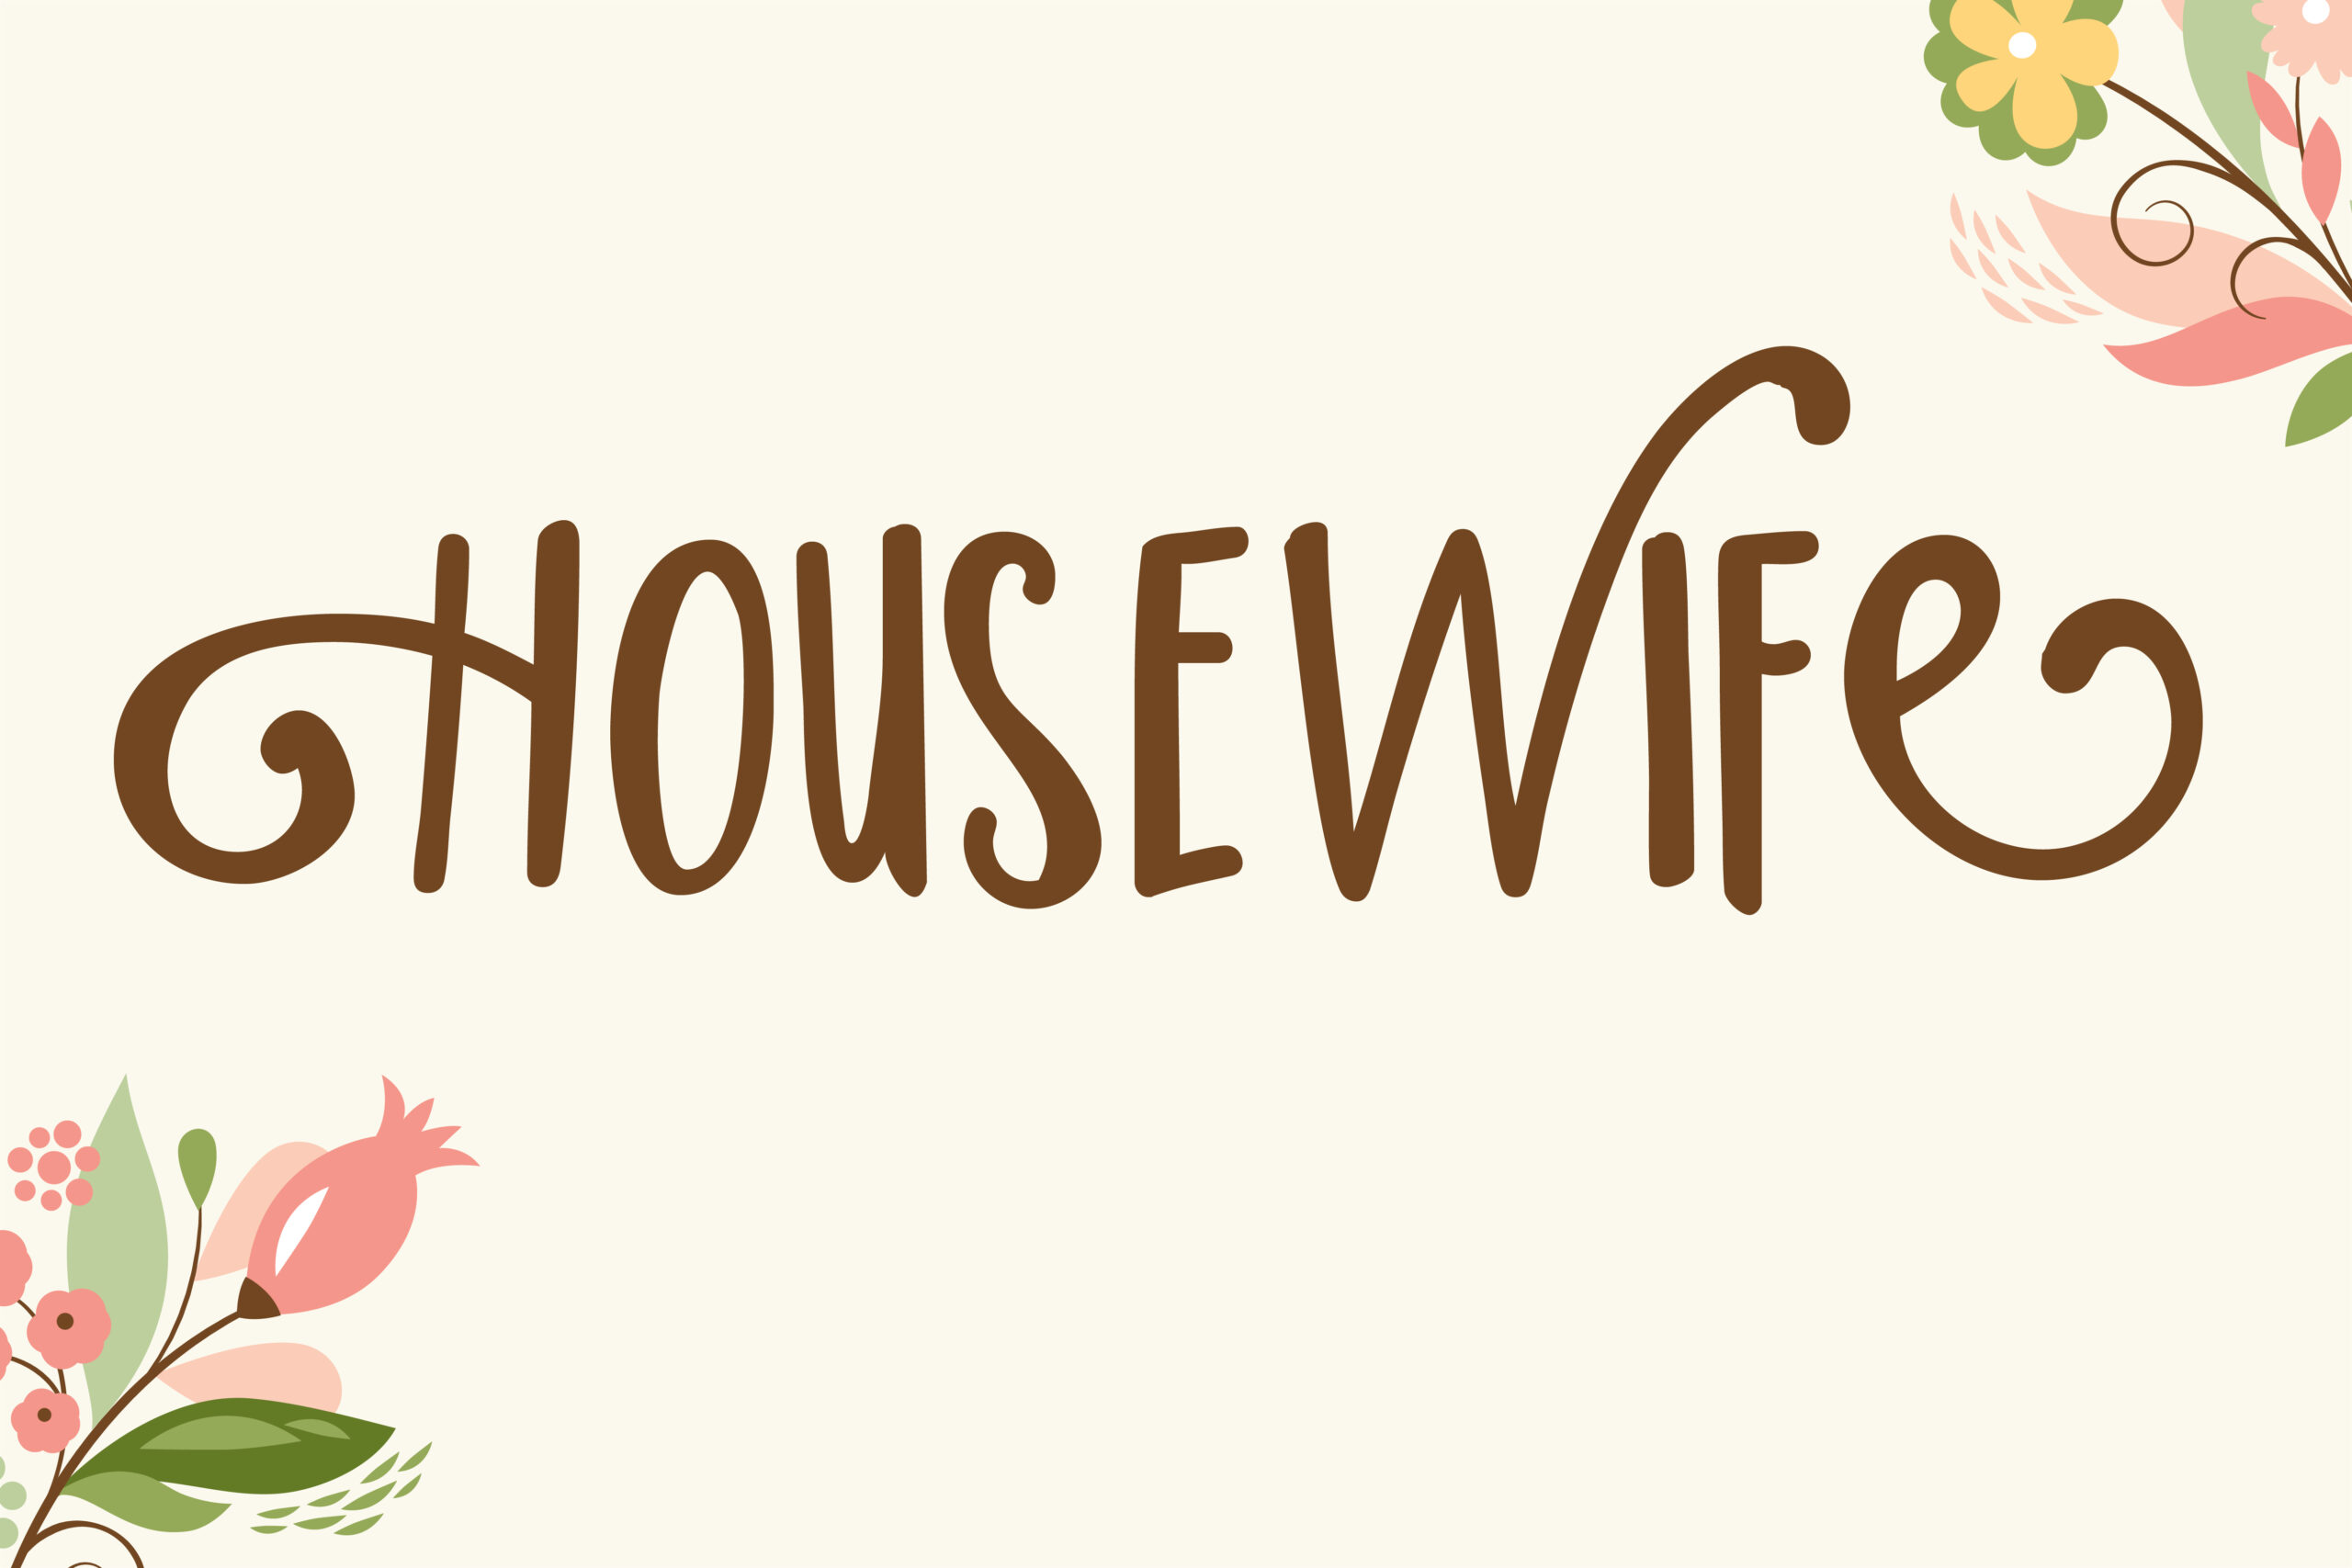 Housewife Font